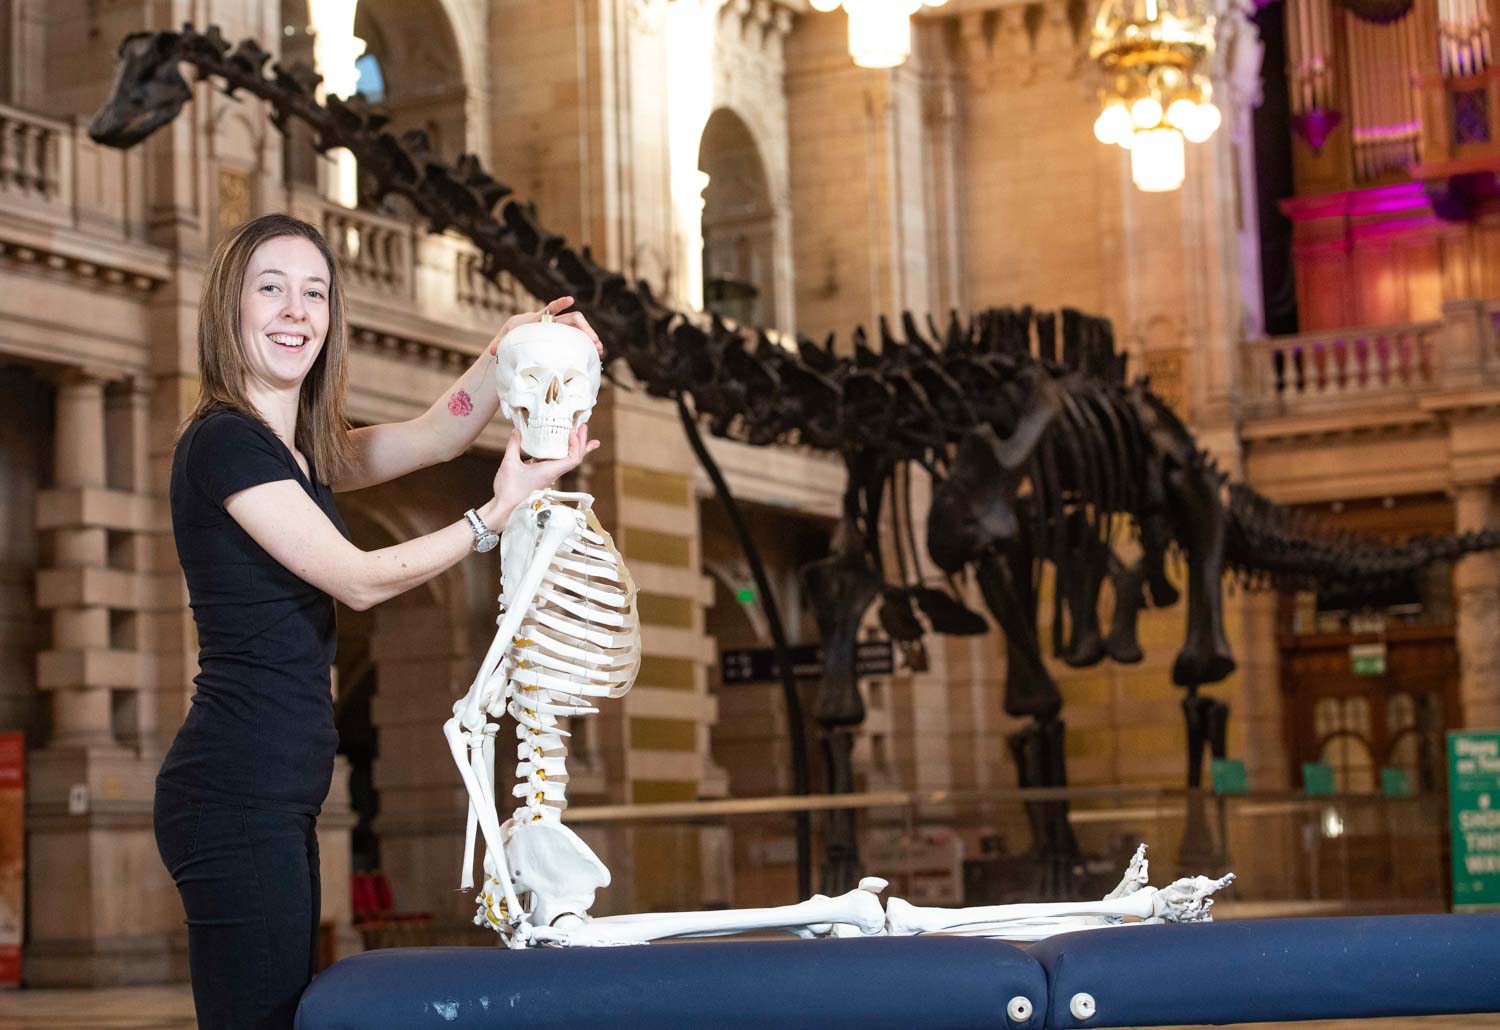 Glasgow Museums, Dippy on tour!, 2019